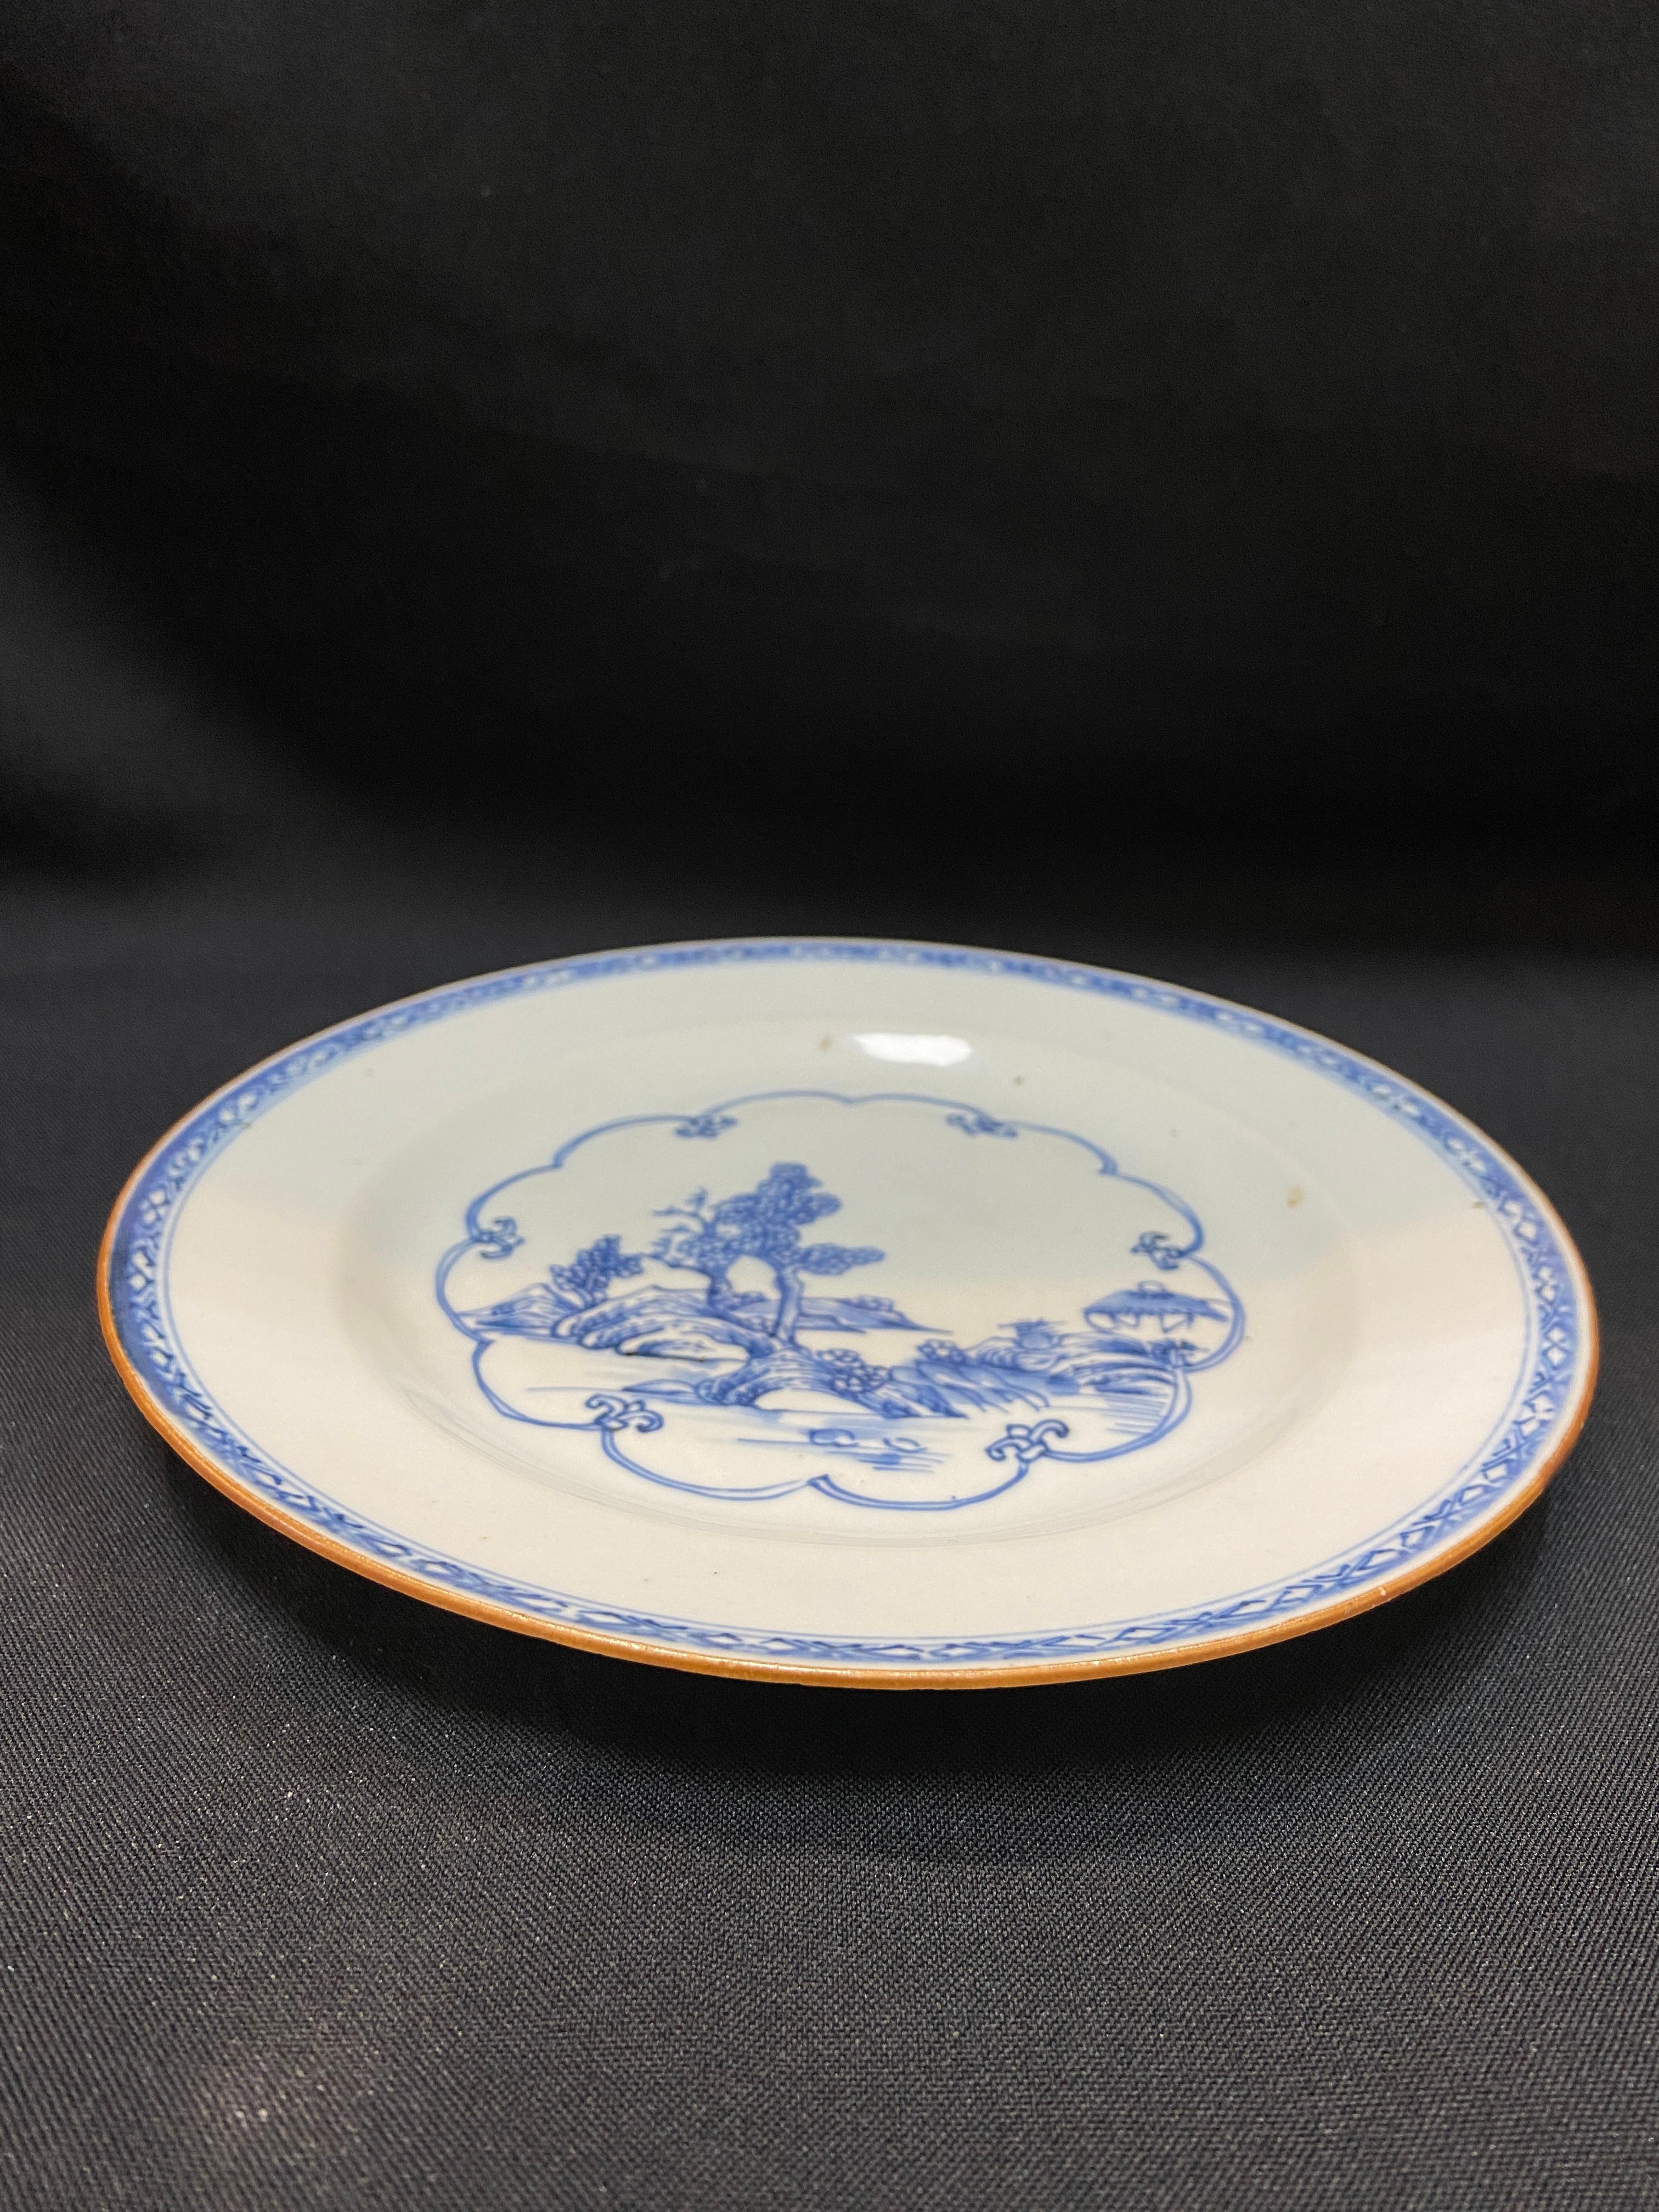 Qing. QianLong period blue and white “Landscape” dish/ 清，乾隆 青花山水图盘(有冲）18th century
Condition：Shows normal sign of wear and use， Please notice around the rim area has a hairline, please refer the photos for condition reports, and exam carefully